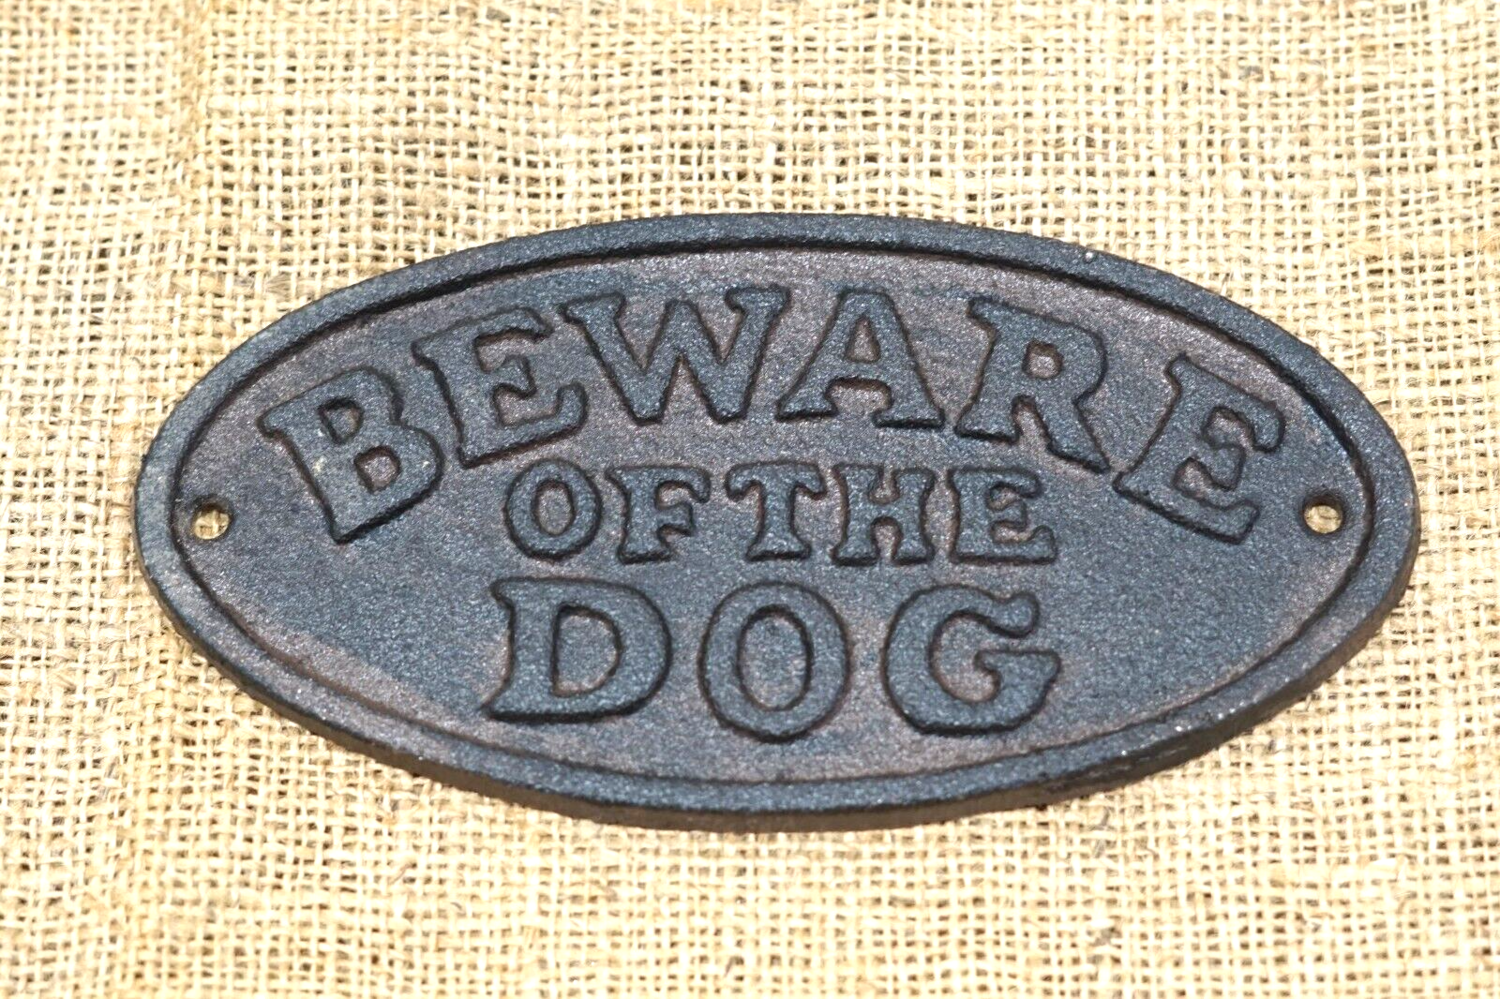 CAST IRON "BEWARE OF THE DOG" SIGN